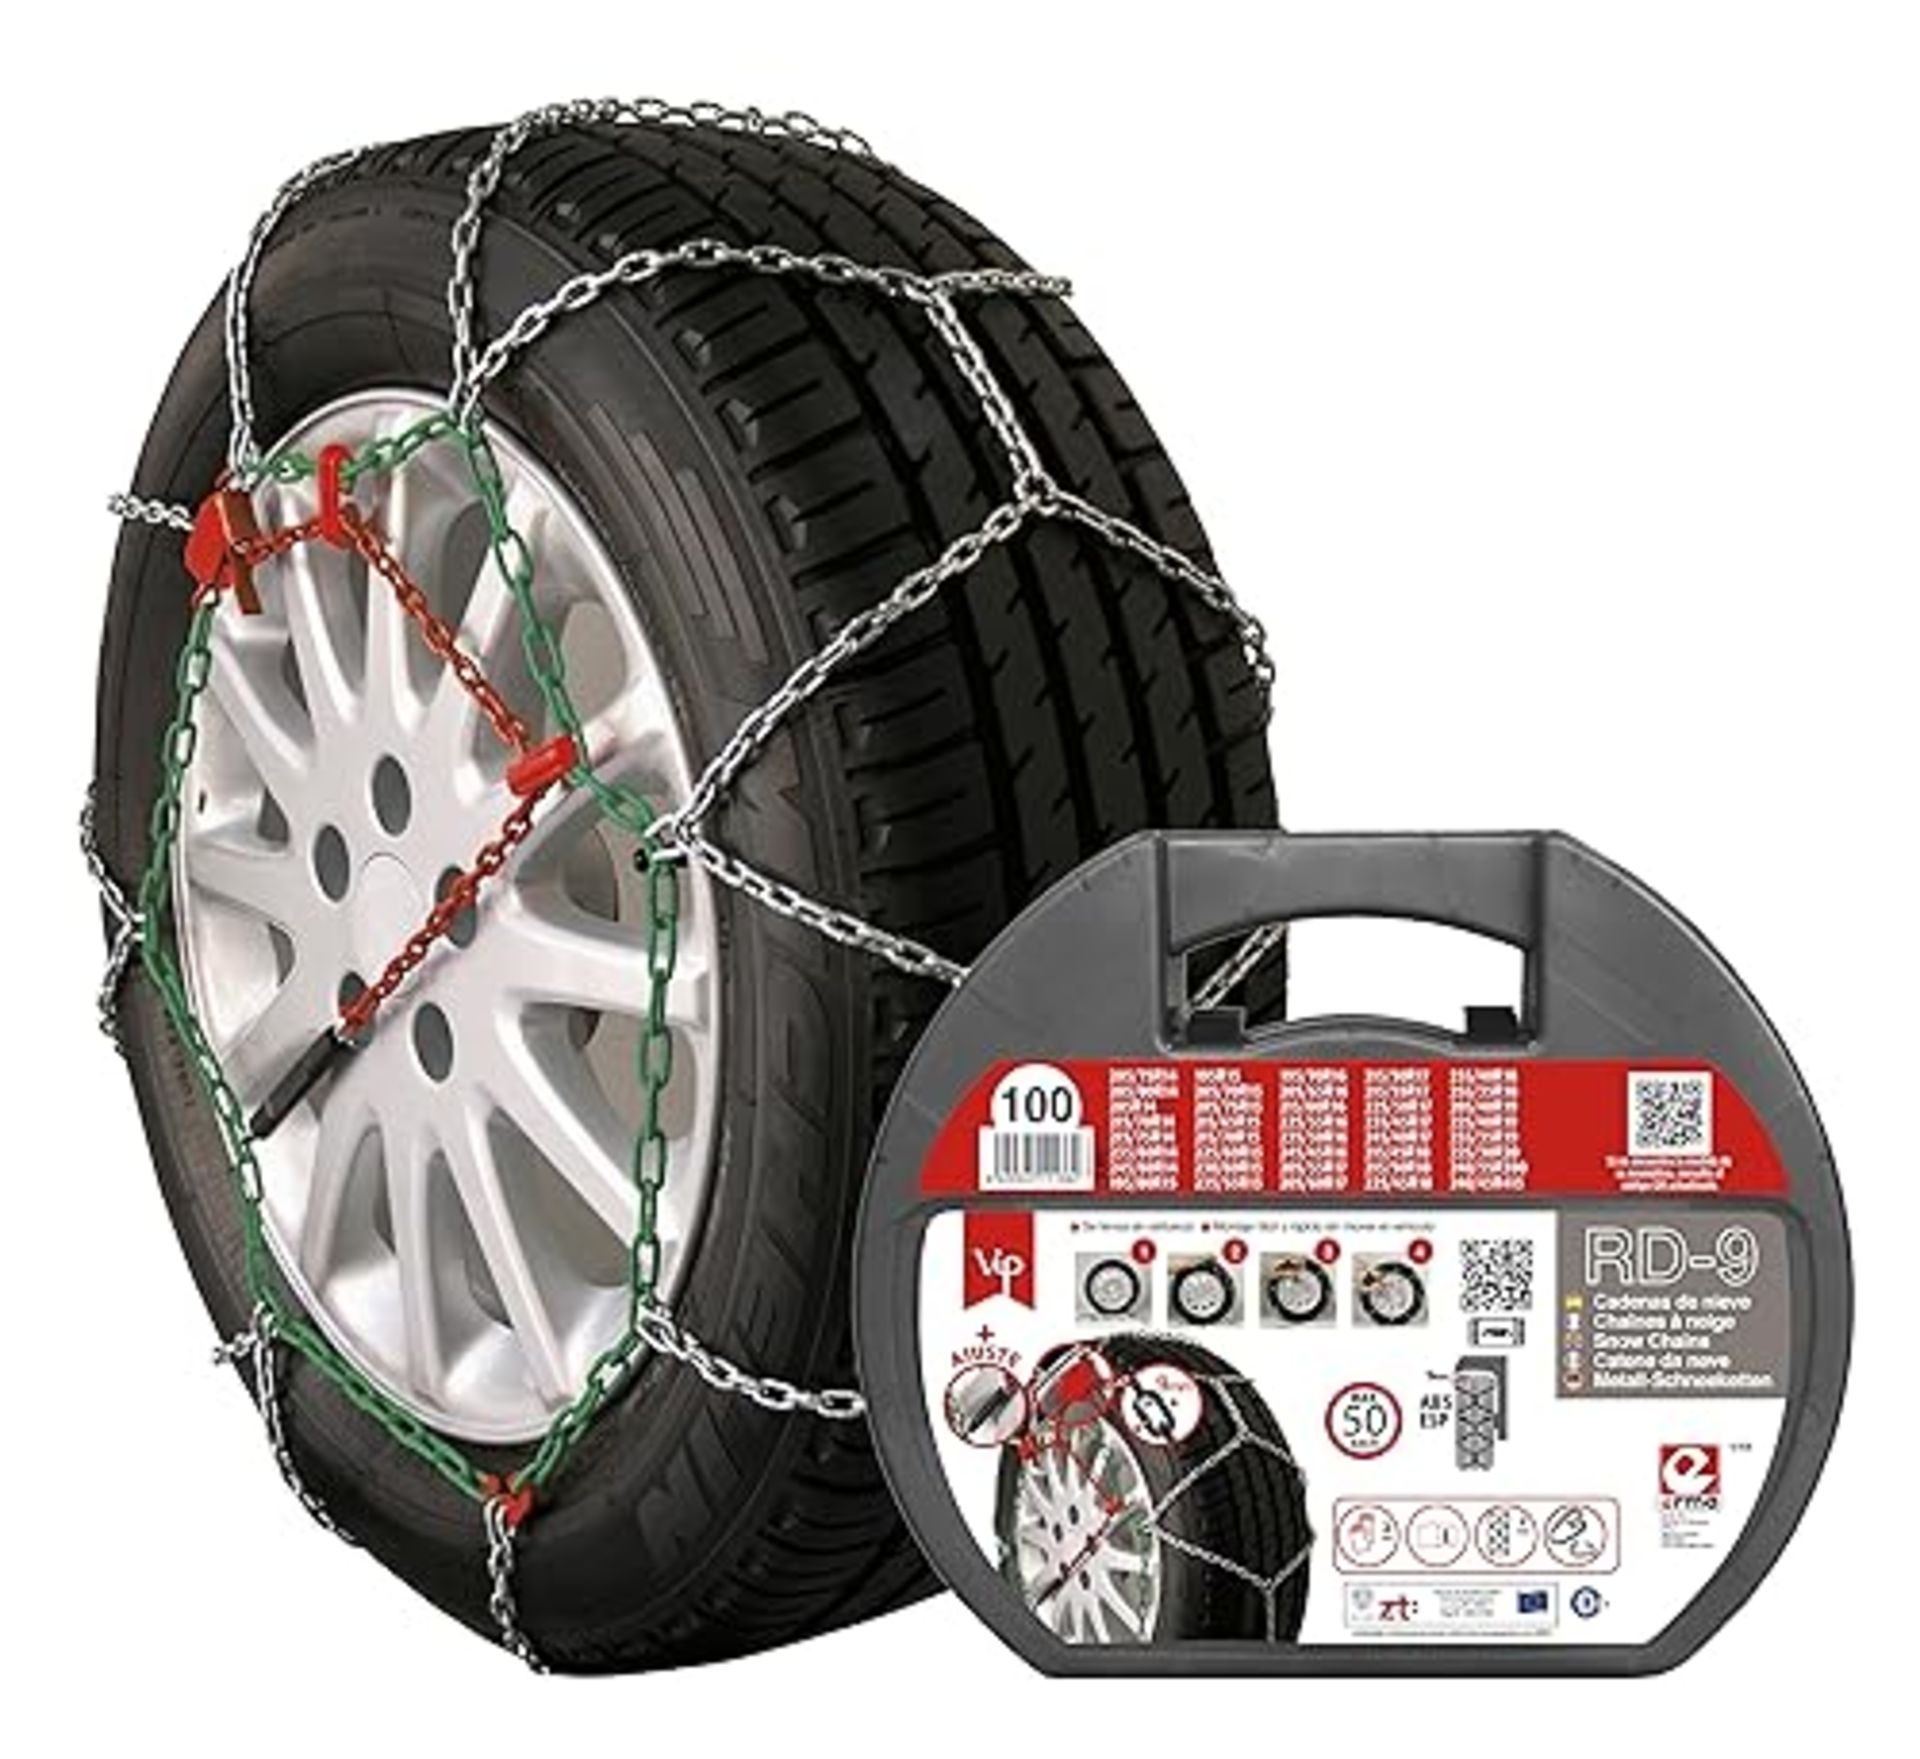 Snow chains made of metal mm size no. 100 - Image 3 of 4